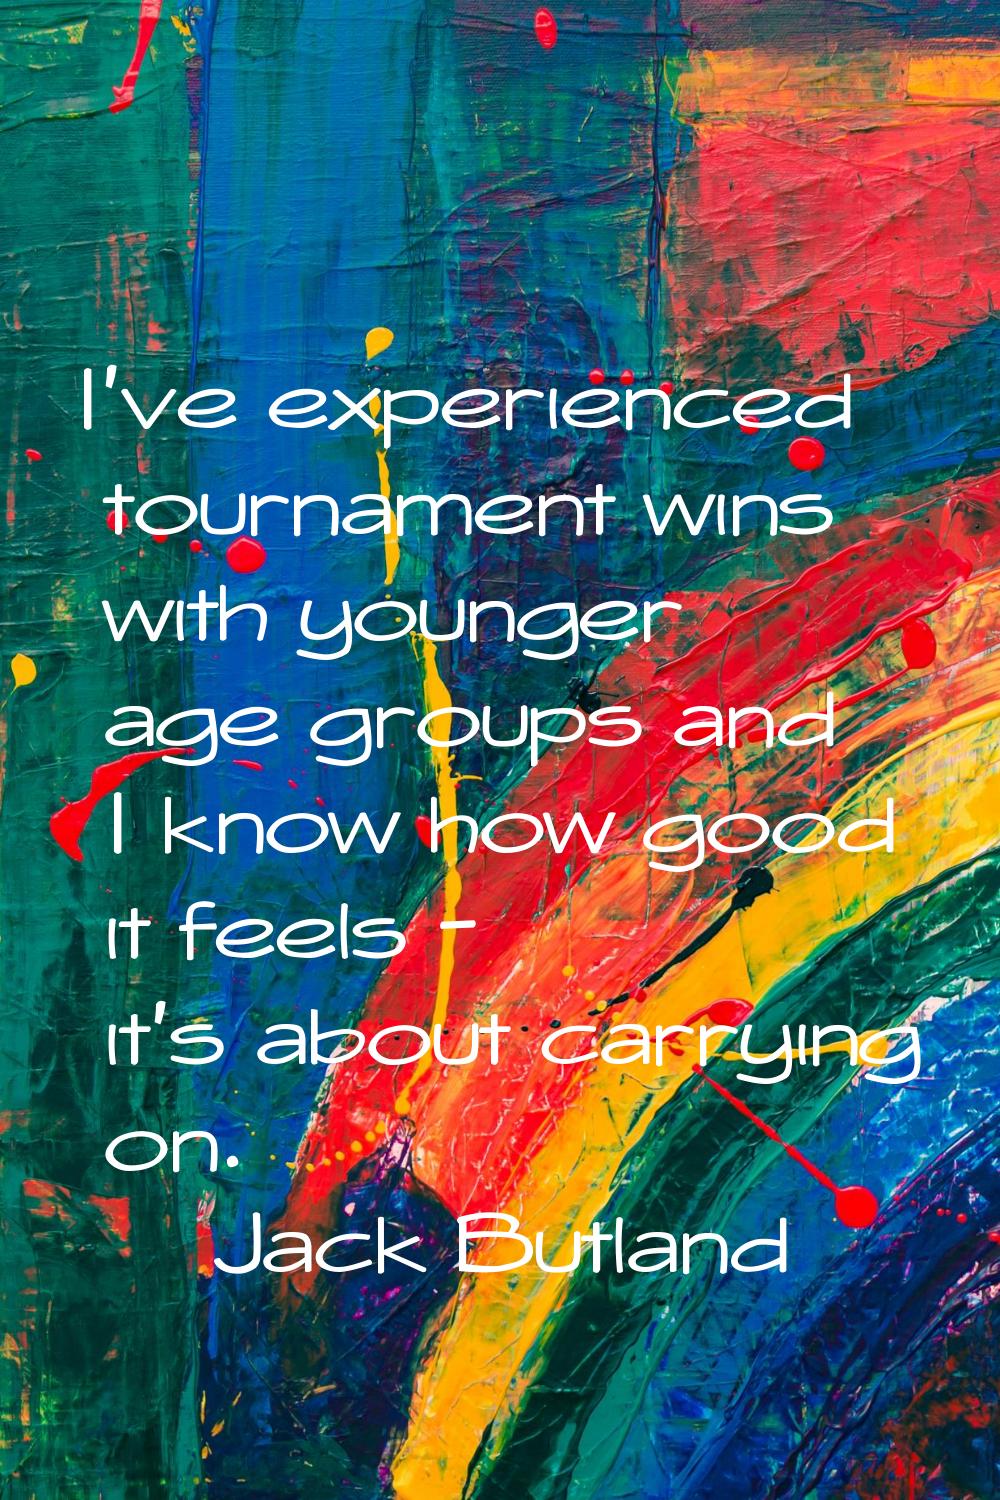 I've experienced tournament wins with younger age groups and I know how good it feels - it's about 